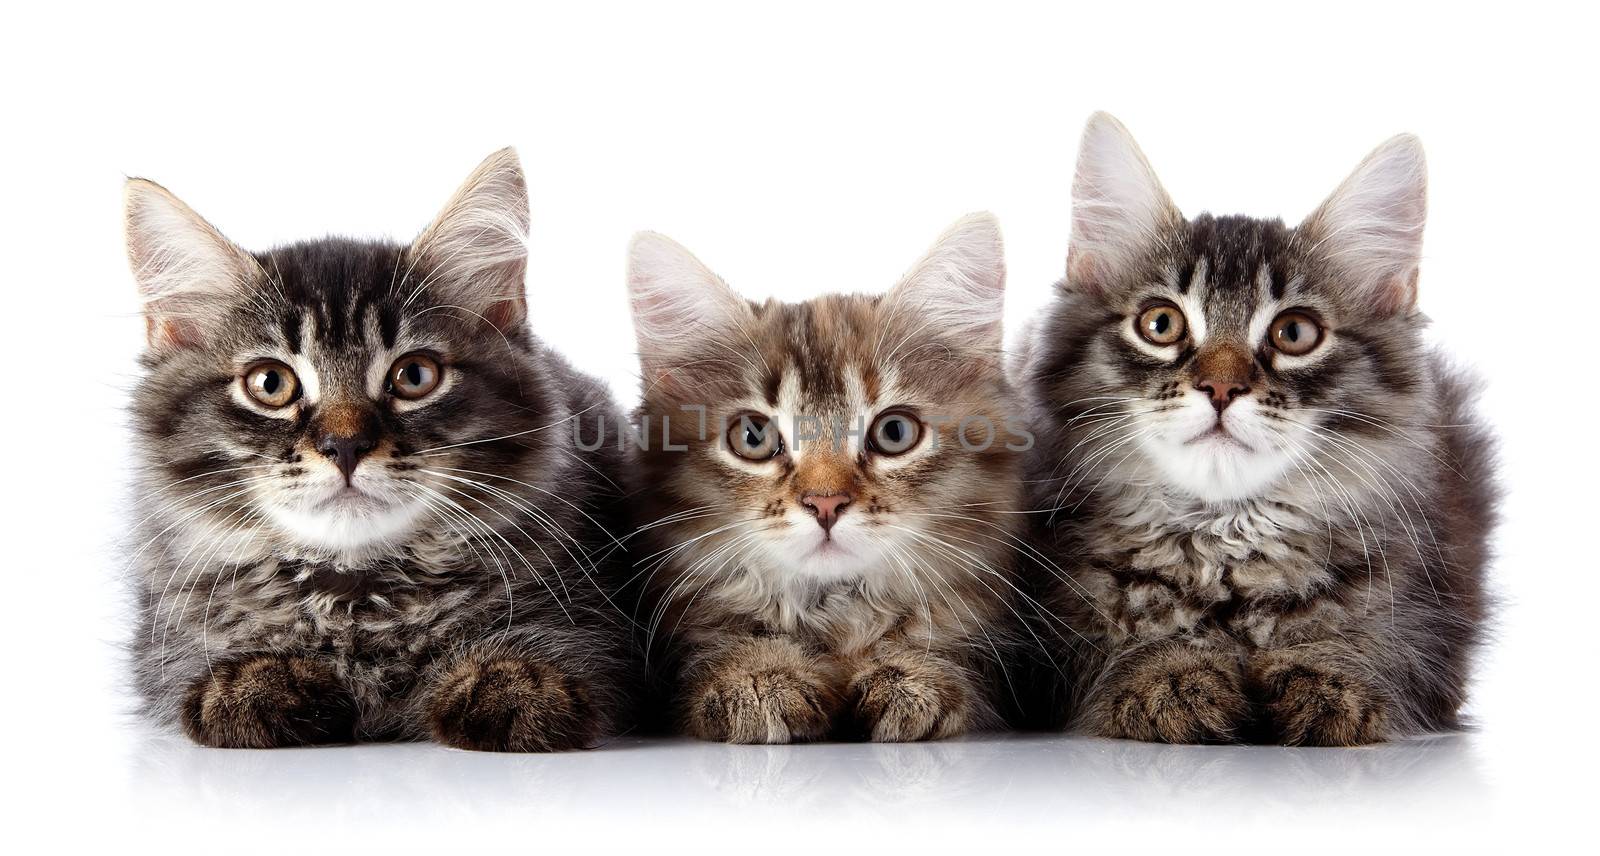 Three fluffy cats.  Striped not purebred kittens. Kittens on a white background. Small predators. Small cats.